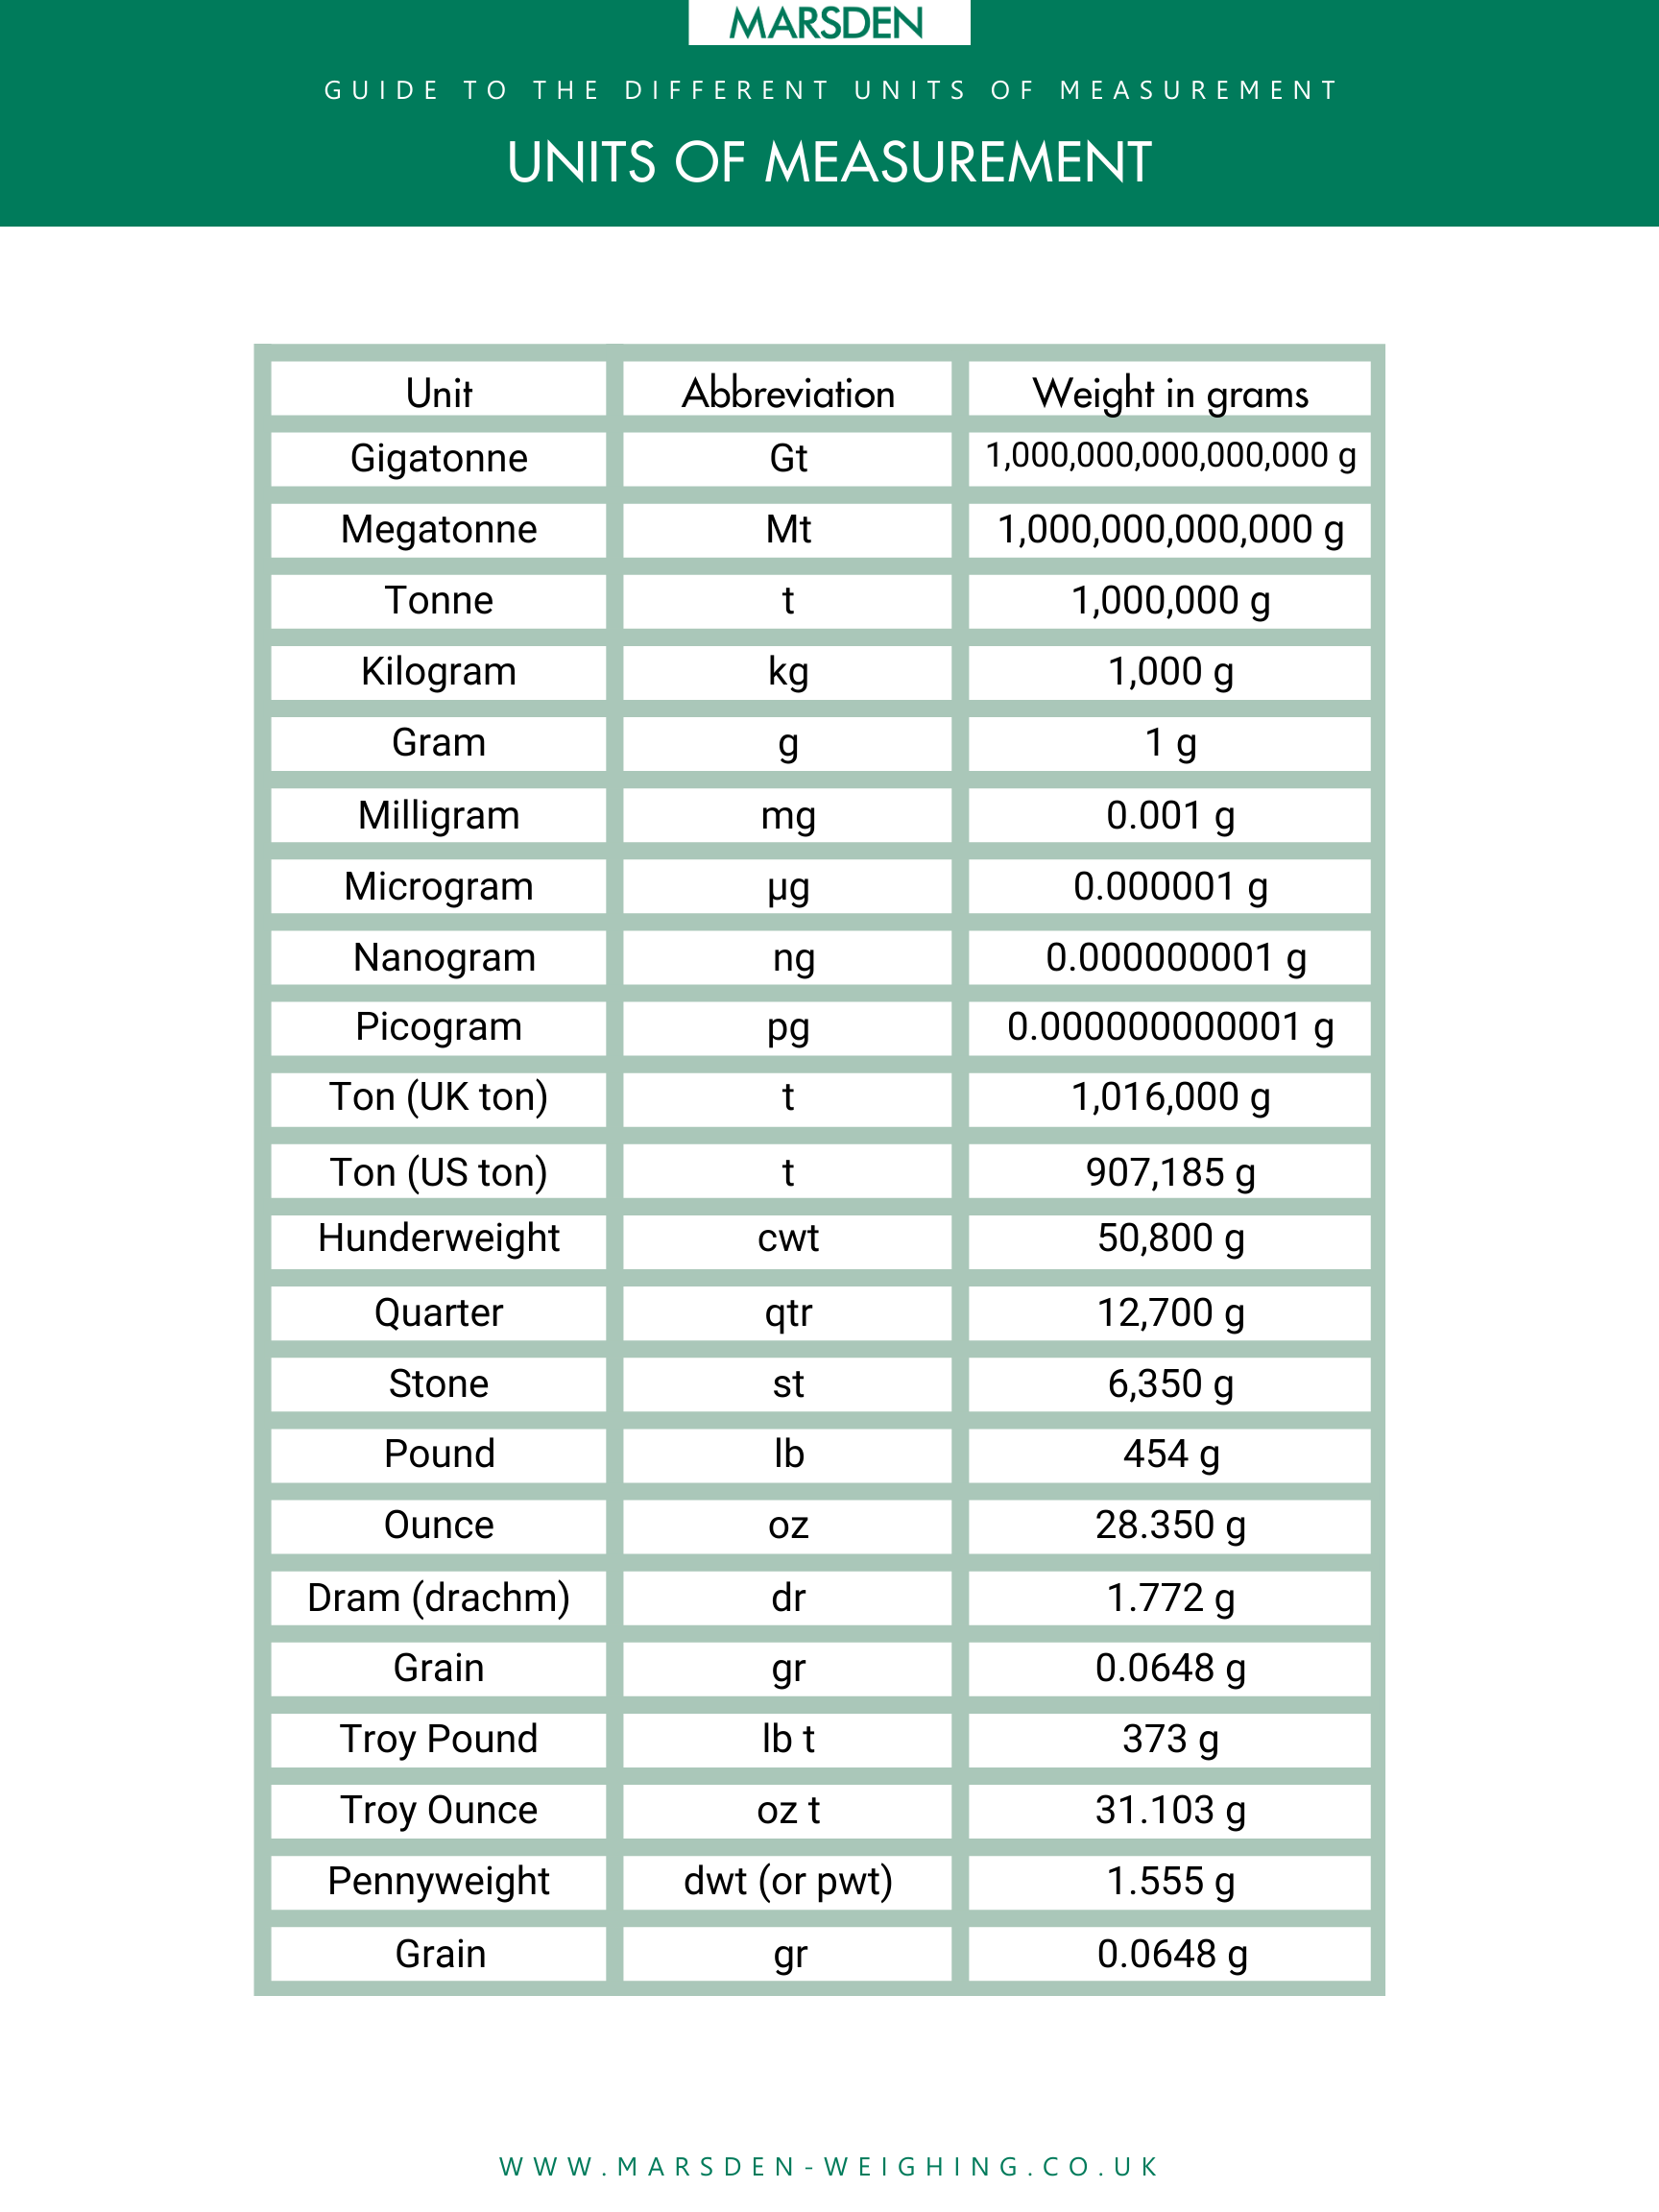 units-of-measurement-guide-free-infographic-marsden-weighing